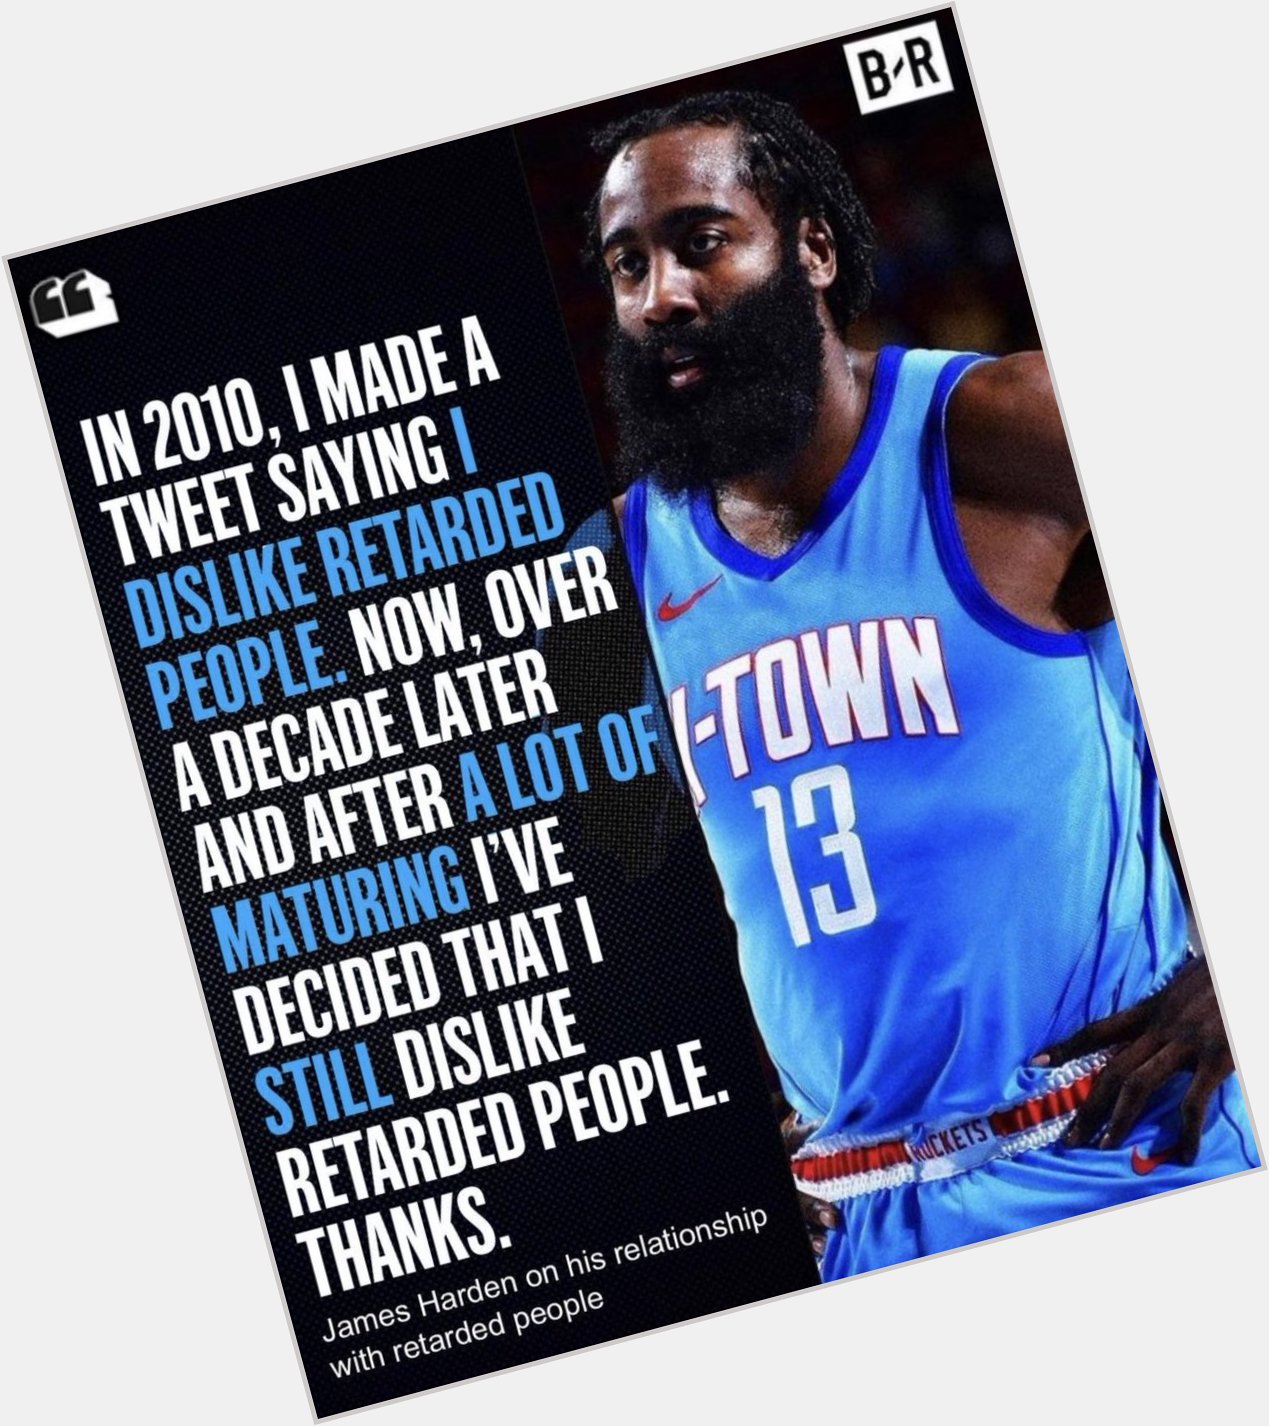 Happy Birthday James Harden! Hope this year doesn t bring another tragic playoff collapse 